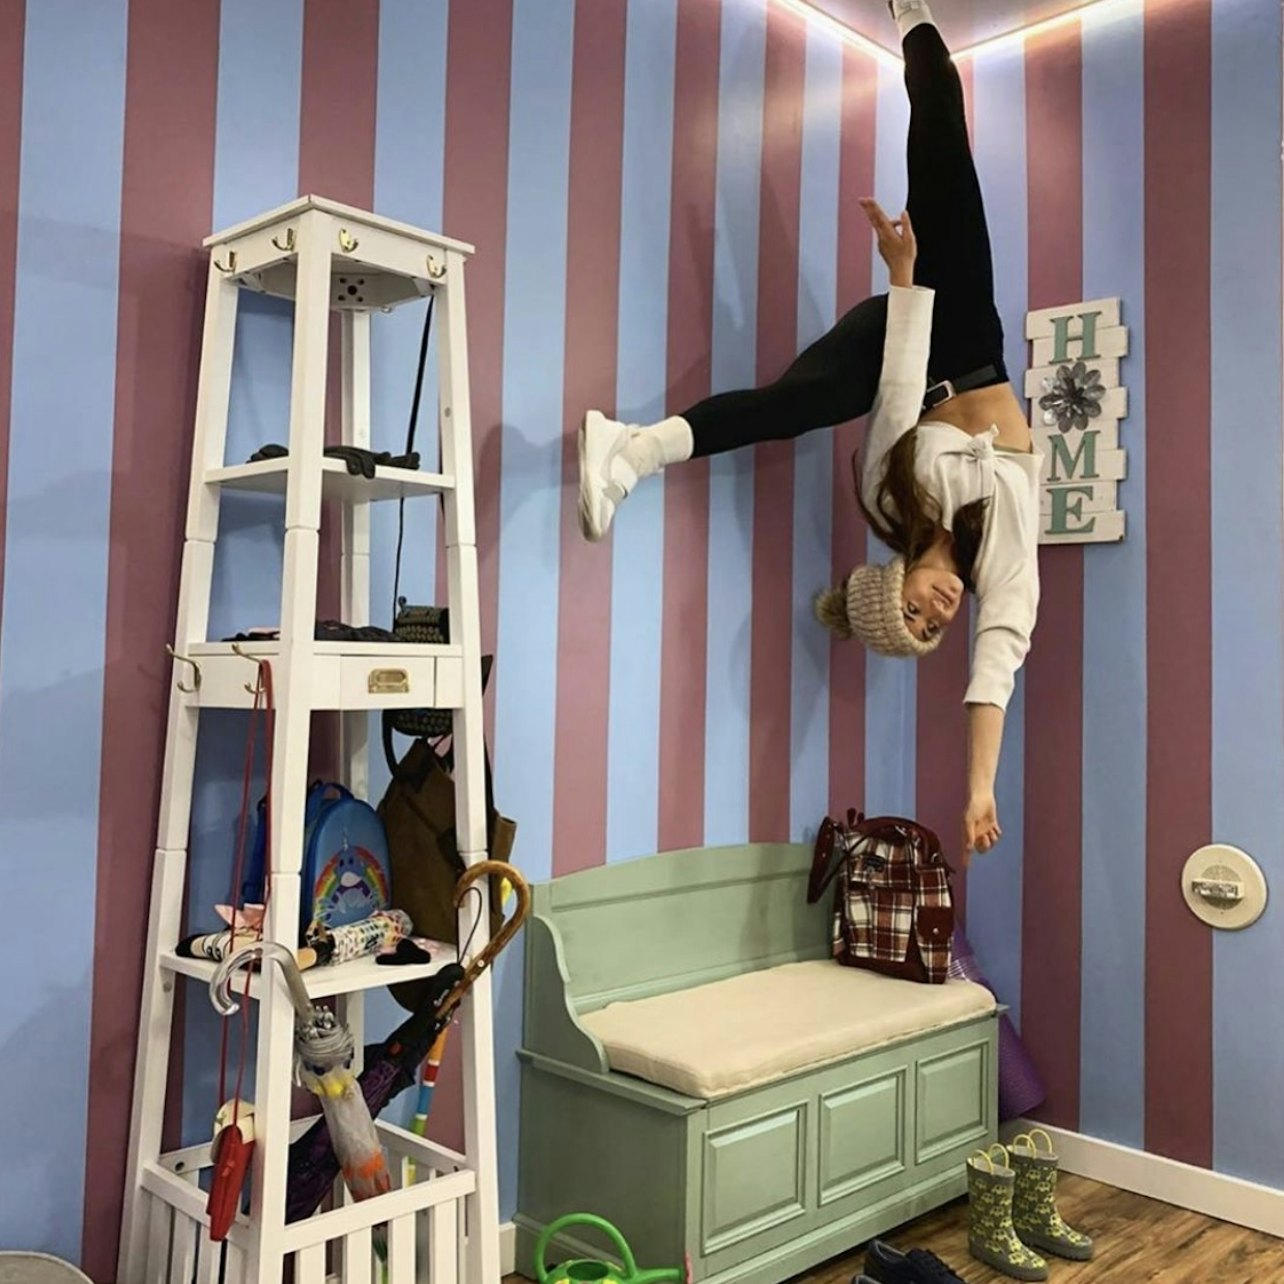 The Upside Down House at World of Illusions - Accommodations in Los Angeles